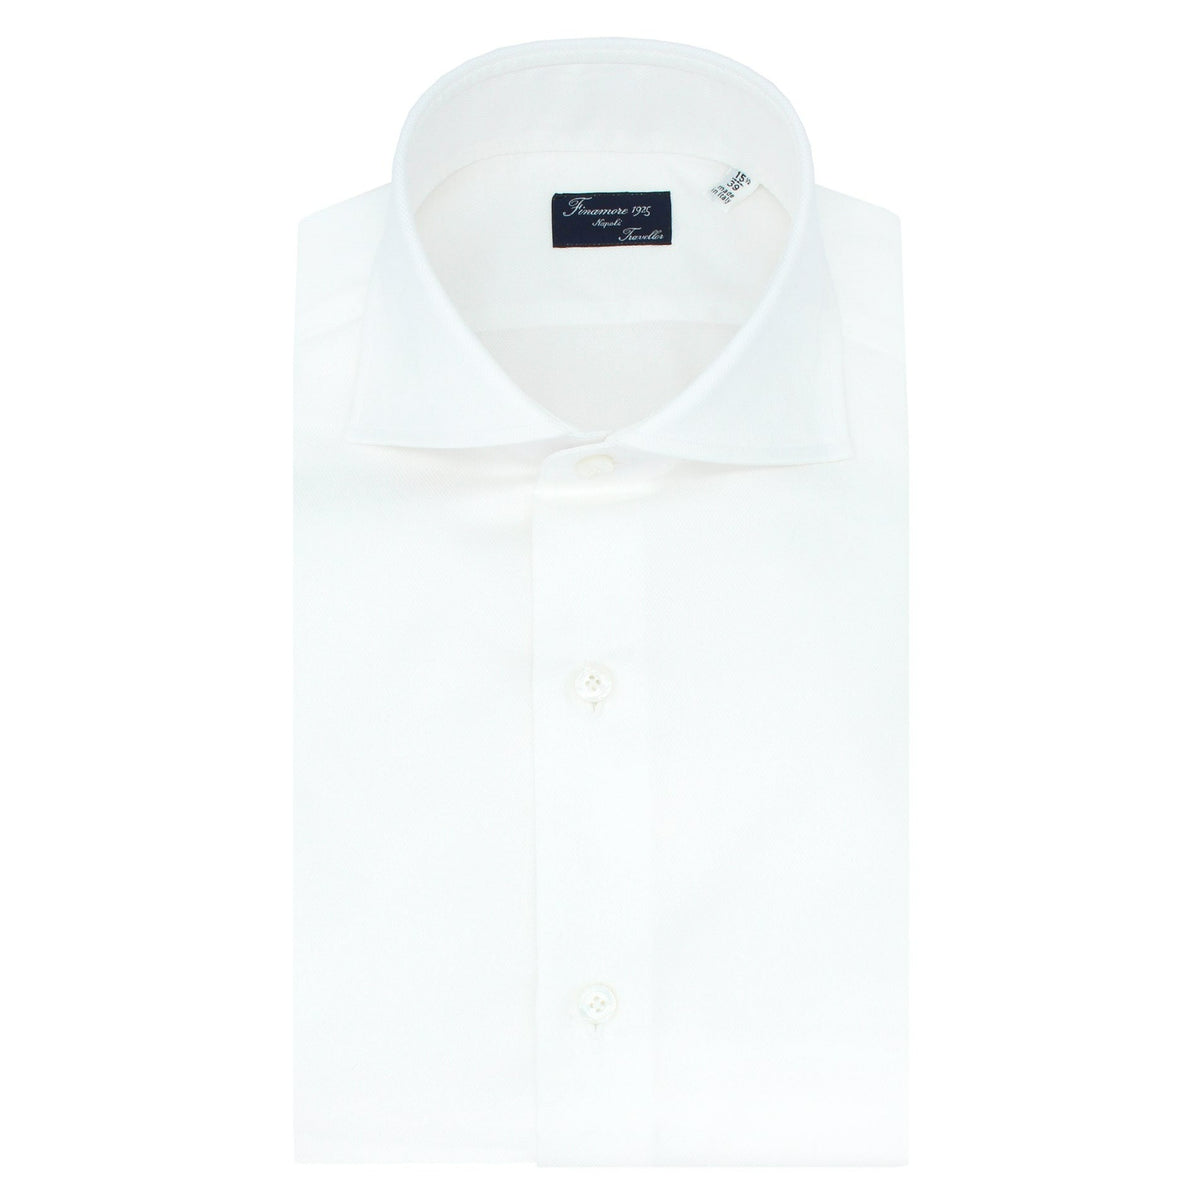 Classic NAPOLI traveller regular fit shirt in white cotton